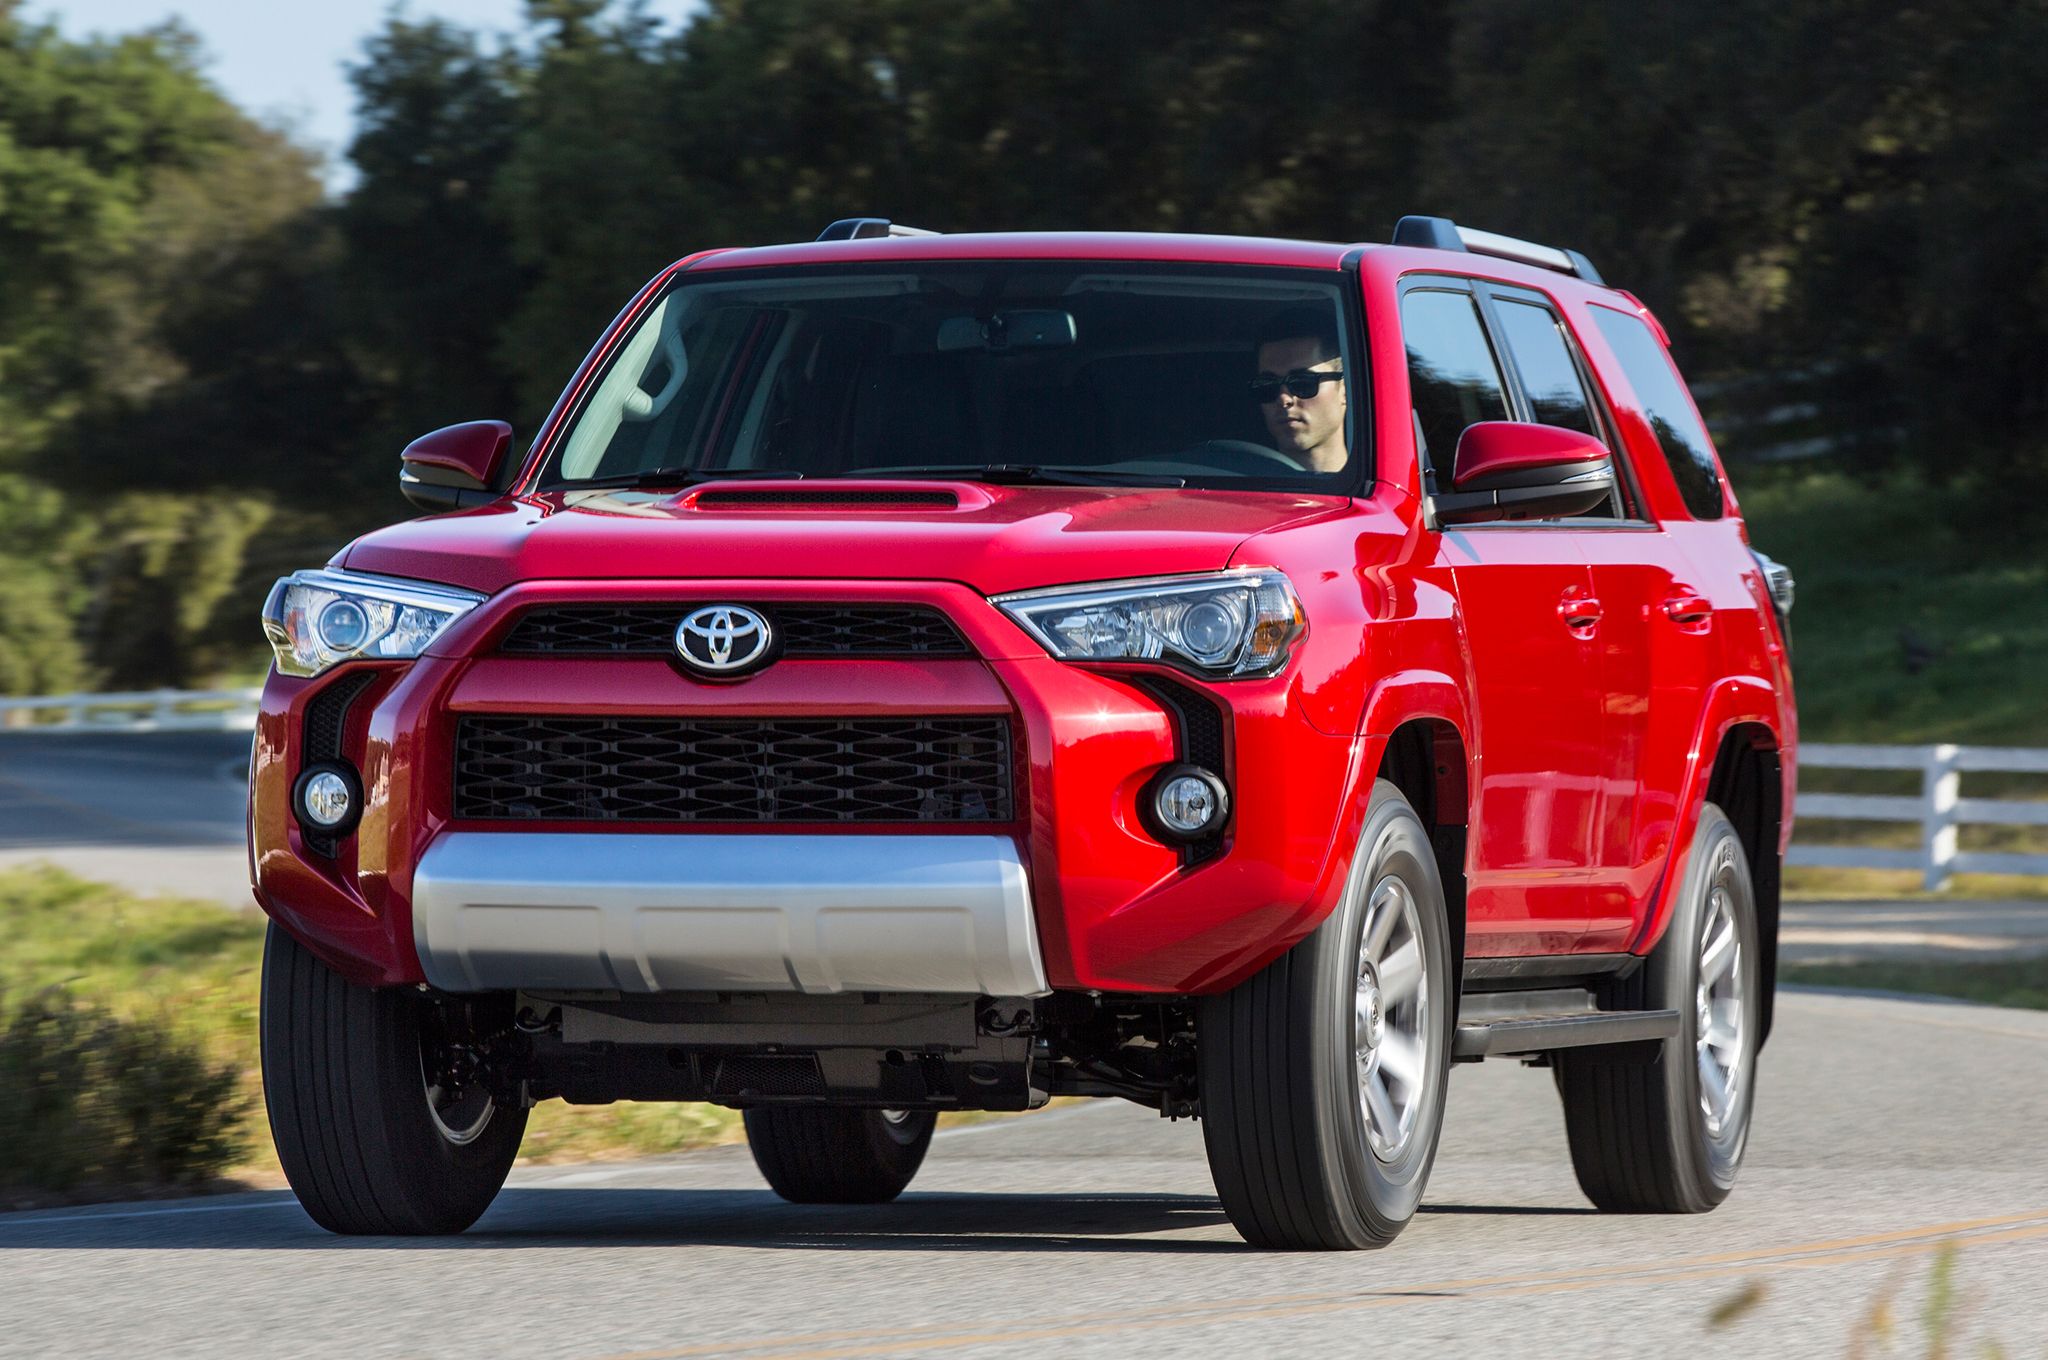 2017 Toyota 4Runner Release date,Pictures,Changes,Interior